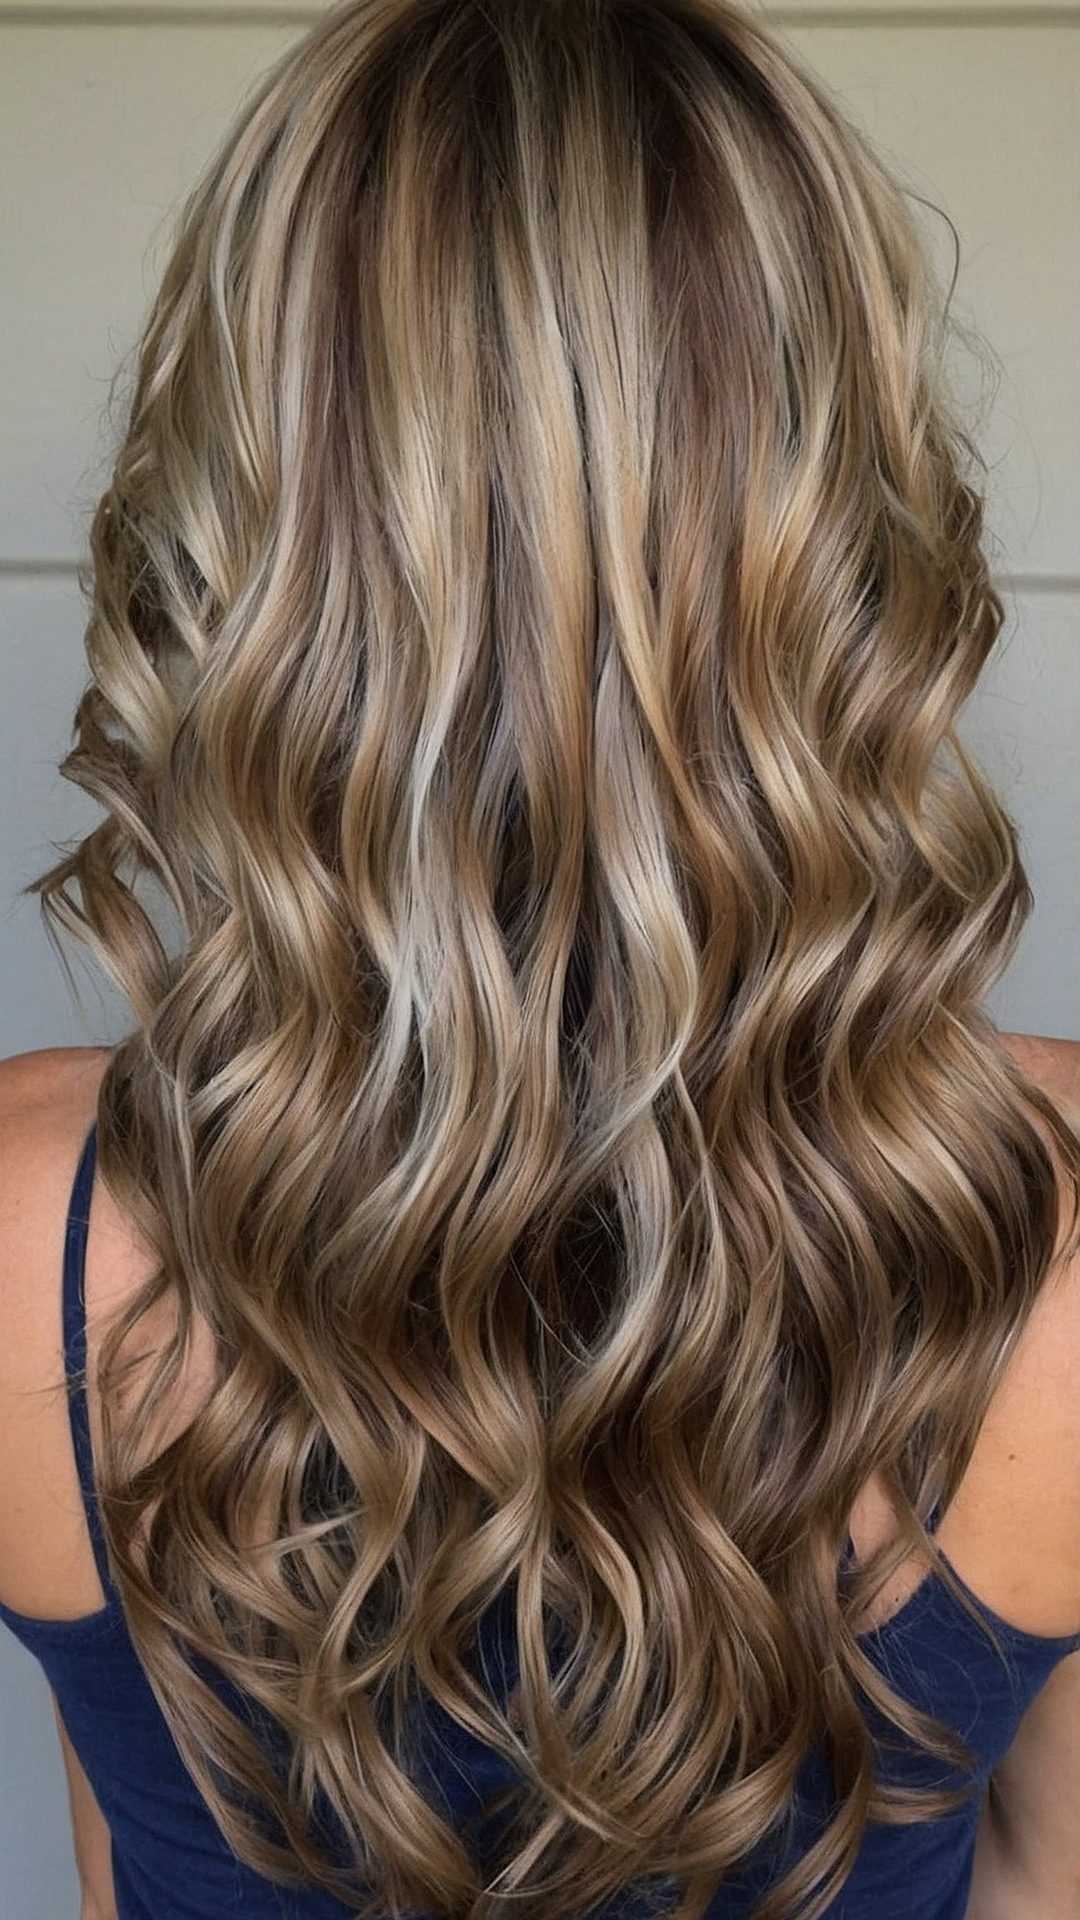 Waves of Inspiration: Wavy Hair Styles Galore